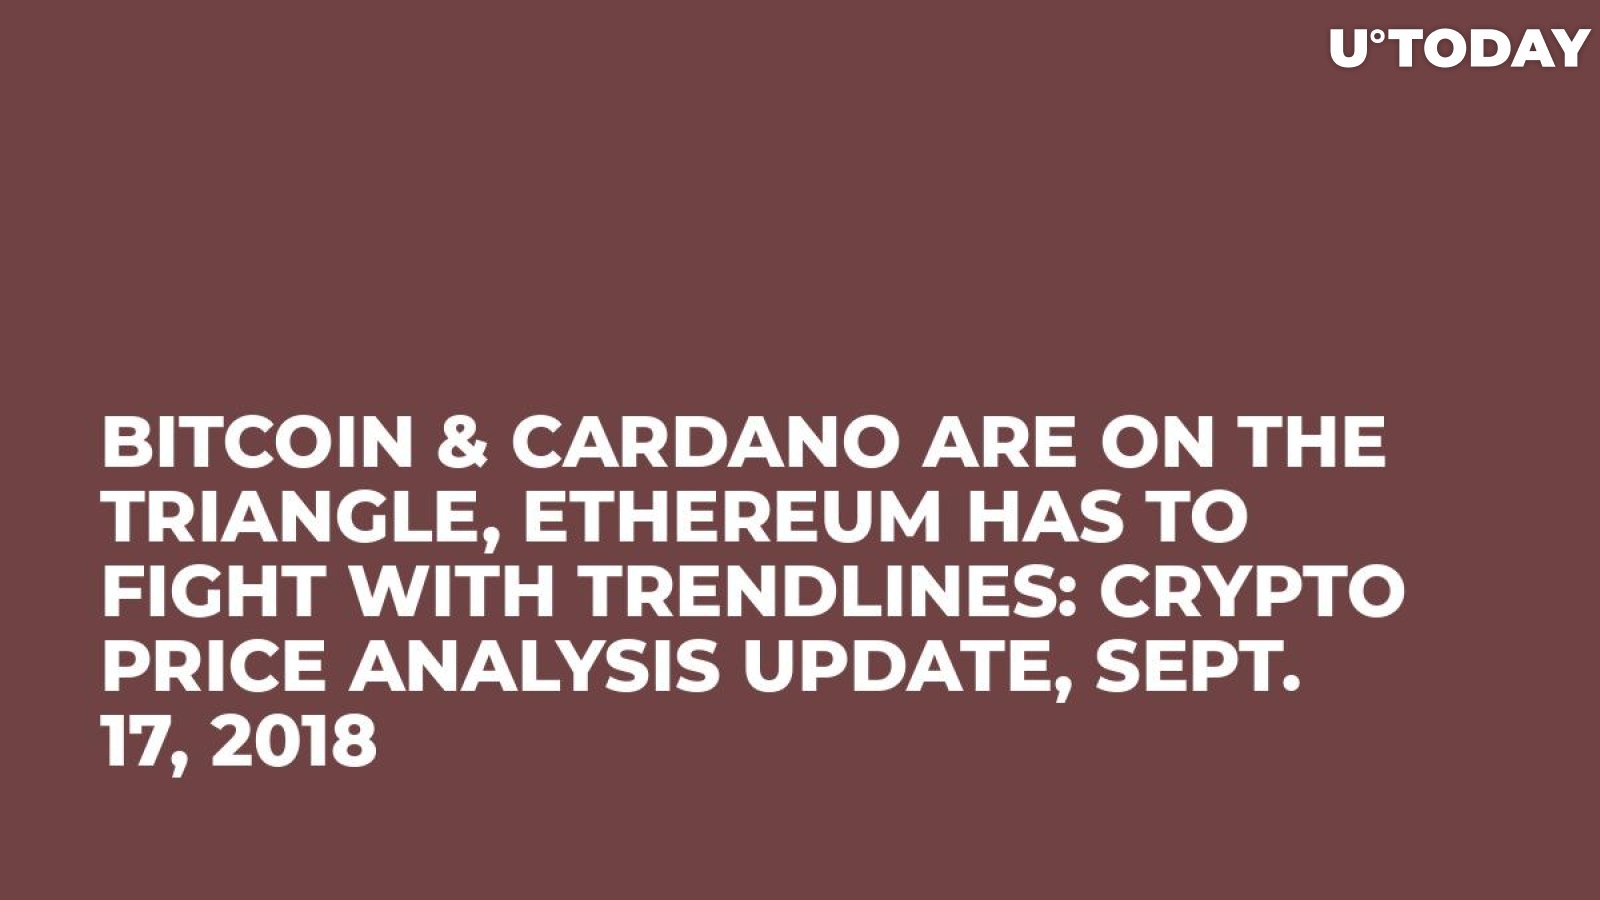 Bitcoin & Cardano Are on the Triangle, Ethereum Has to Fight With Trendlines: Crypto Price Analysis Update, Sept. 17, 2018